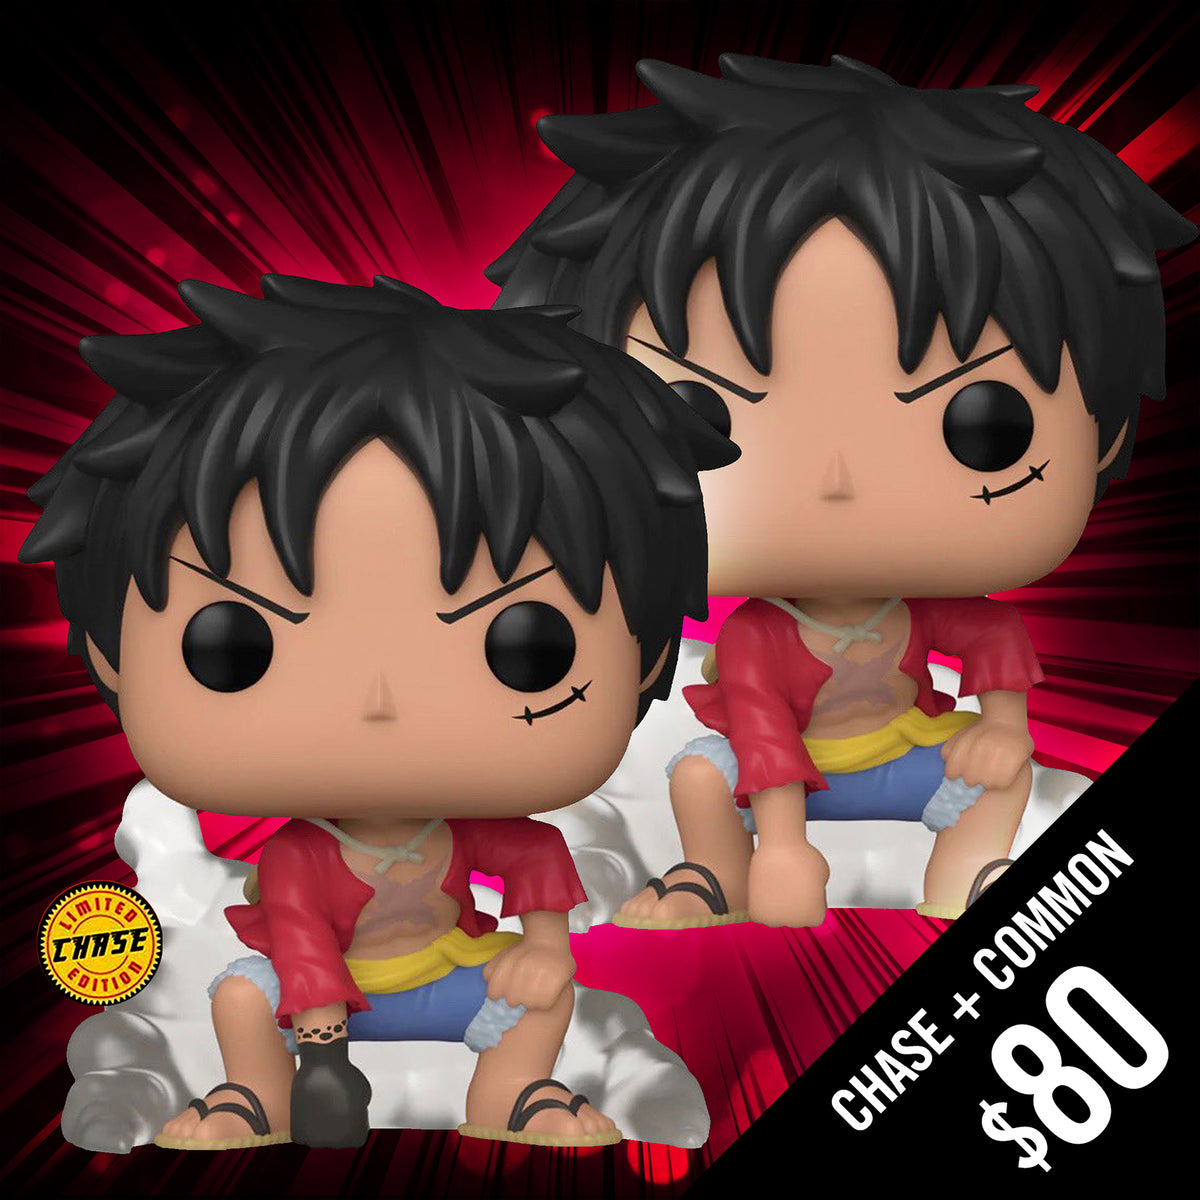 Funko Pop! One Piece - Luffy Gear Two #1269 - Chase Chance